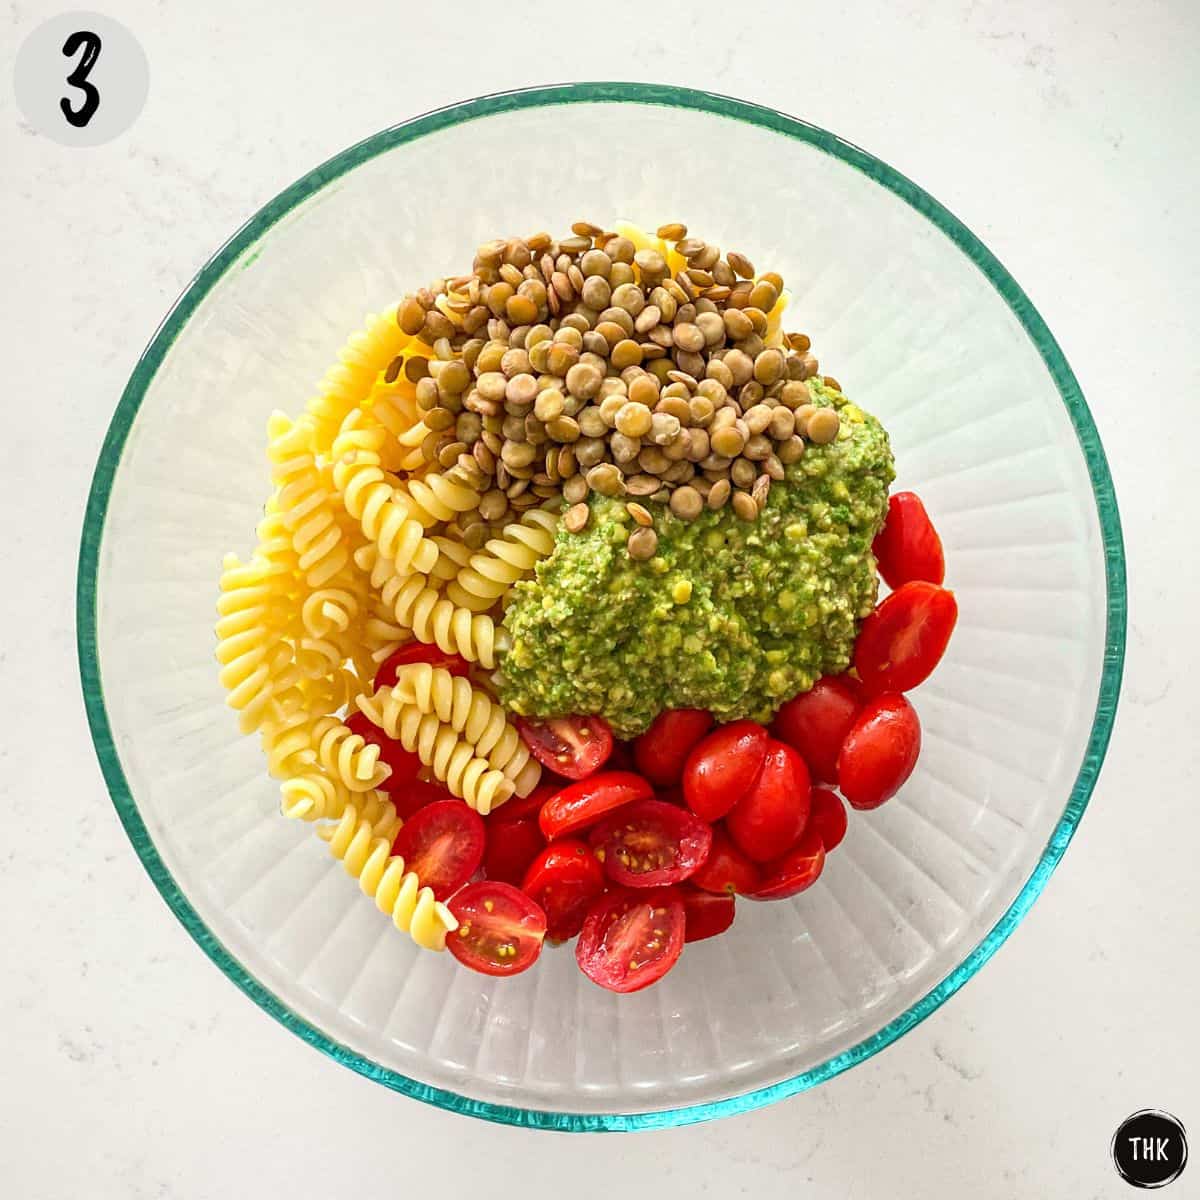 Large bowl with cooked pasta, lentils, pesto, and cherry tomatoes inside.